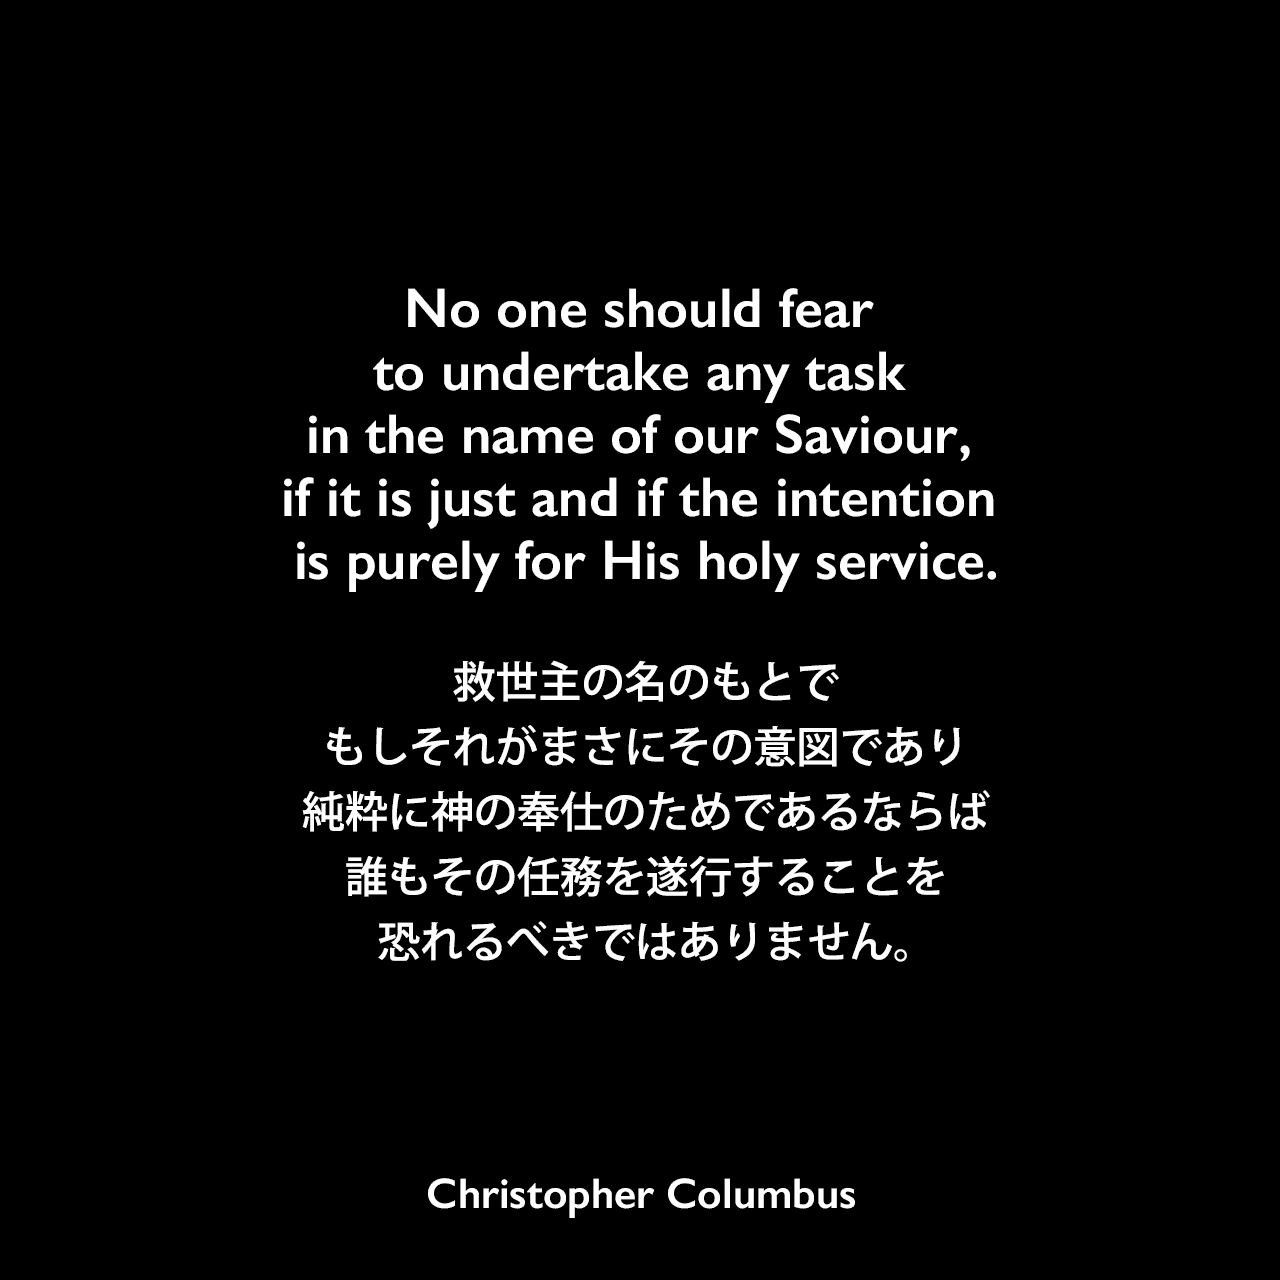 No one should fear to undertake any task in the name of our Saviour, if it is just and if the intention is purely for His holy service.救世主の名のもとで、もしそれがまさにその意図であり、純粋に神の奉仕のためであるならば、誰もその任務を遂行することを恐れるべきではありません。Christopher Columbus